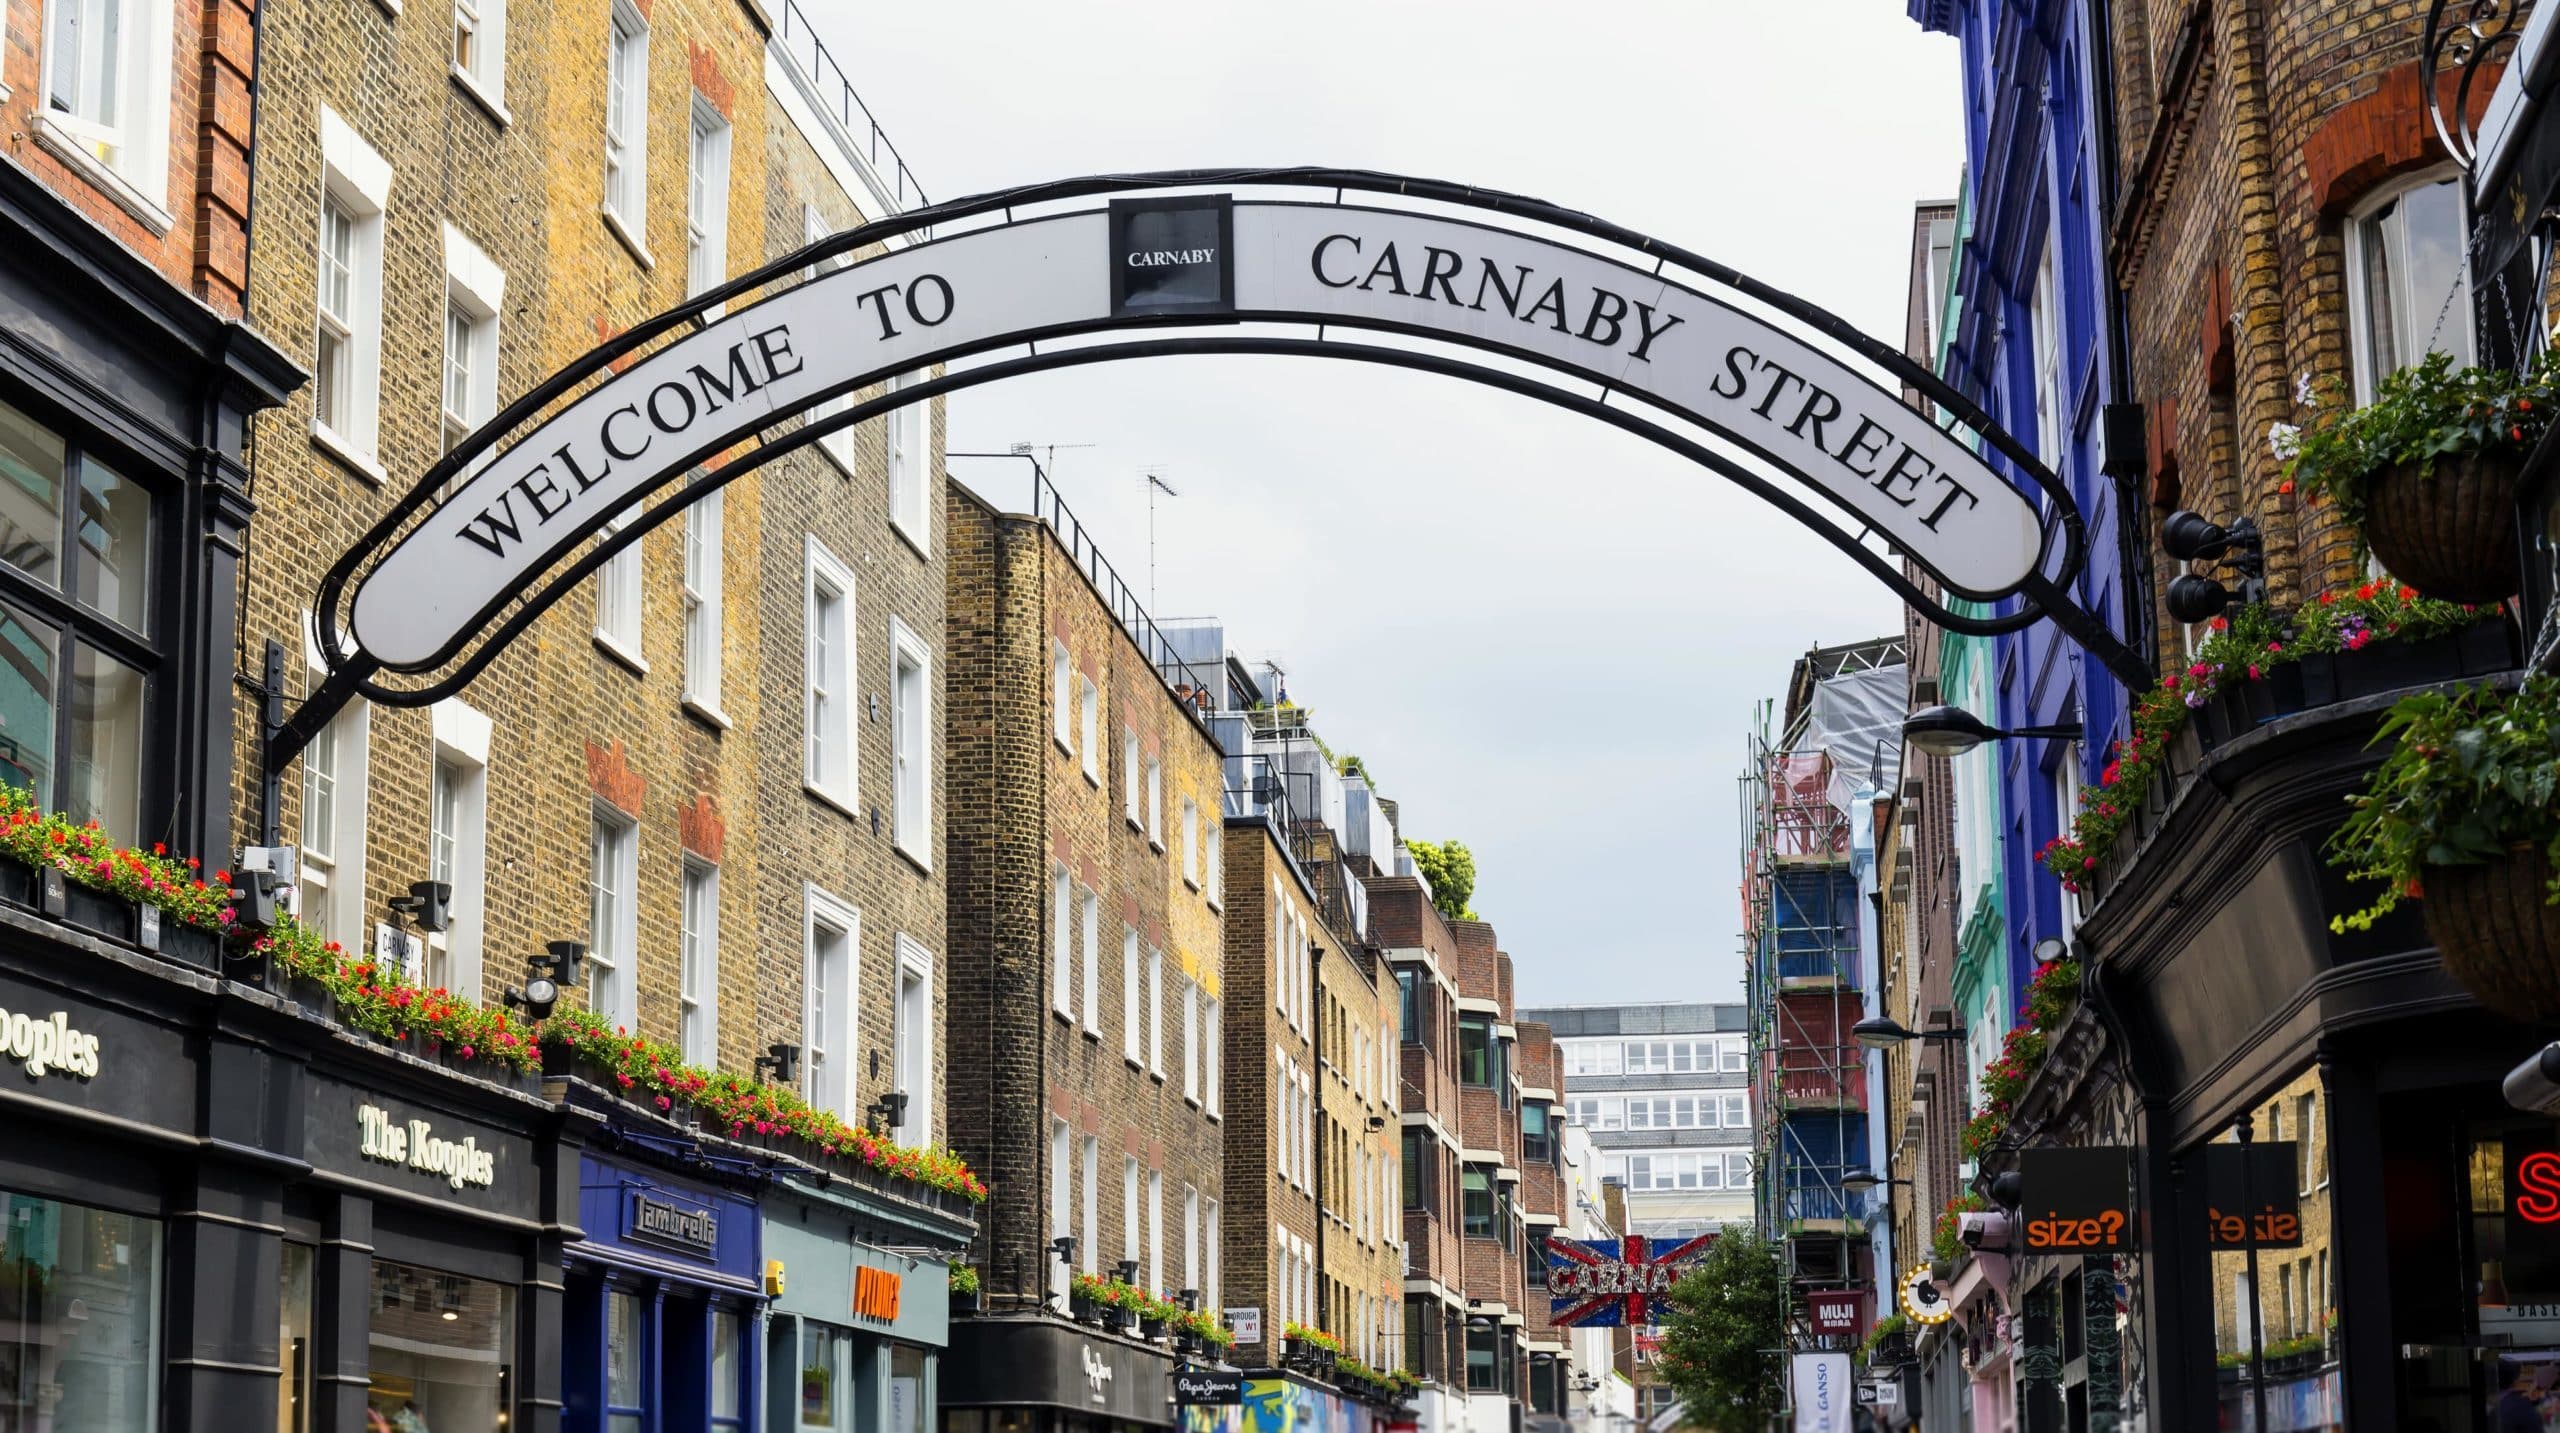 Serviced offices on Carnaby Street